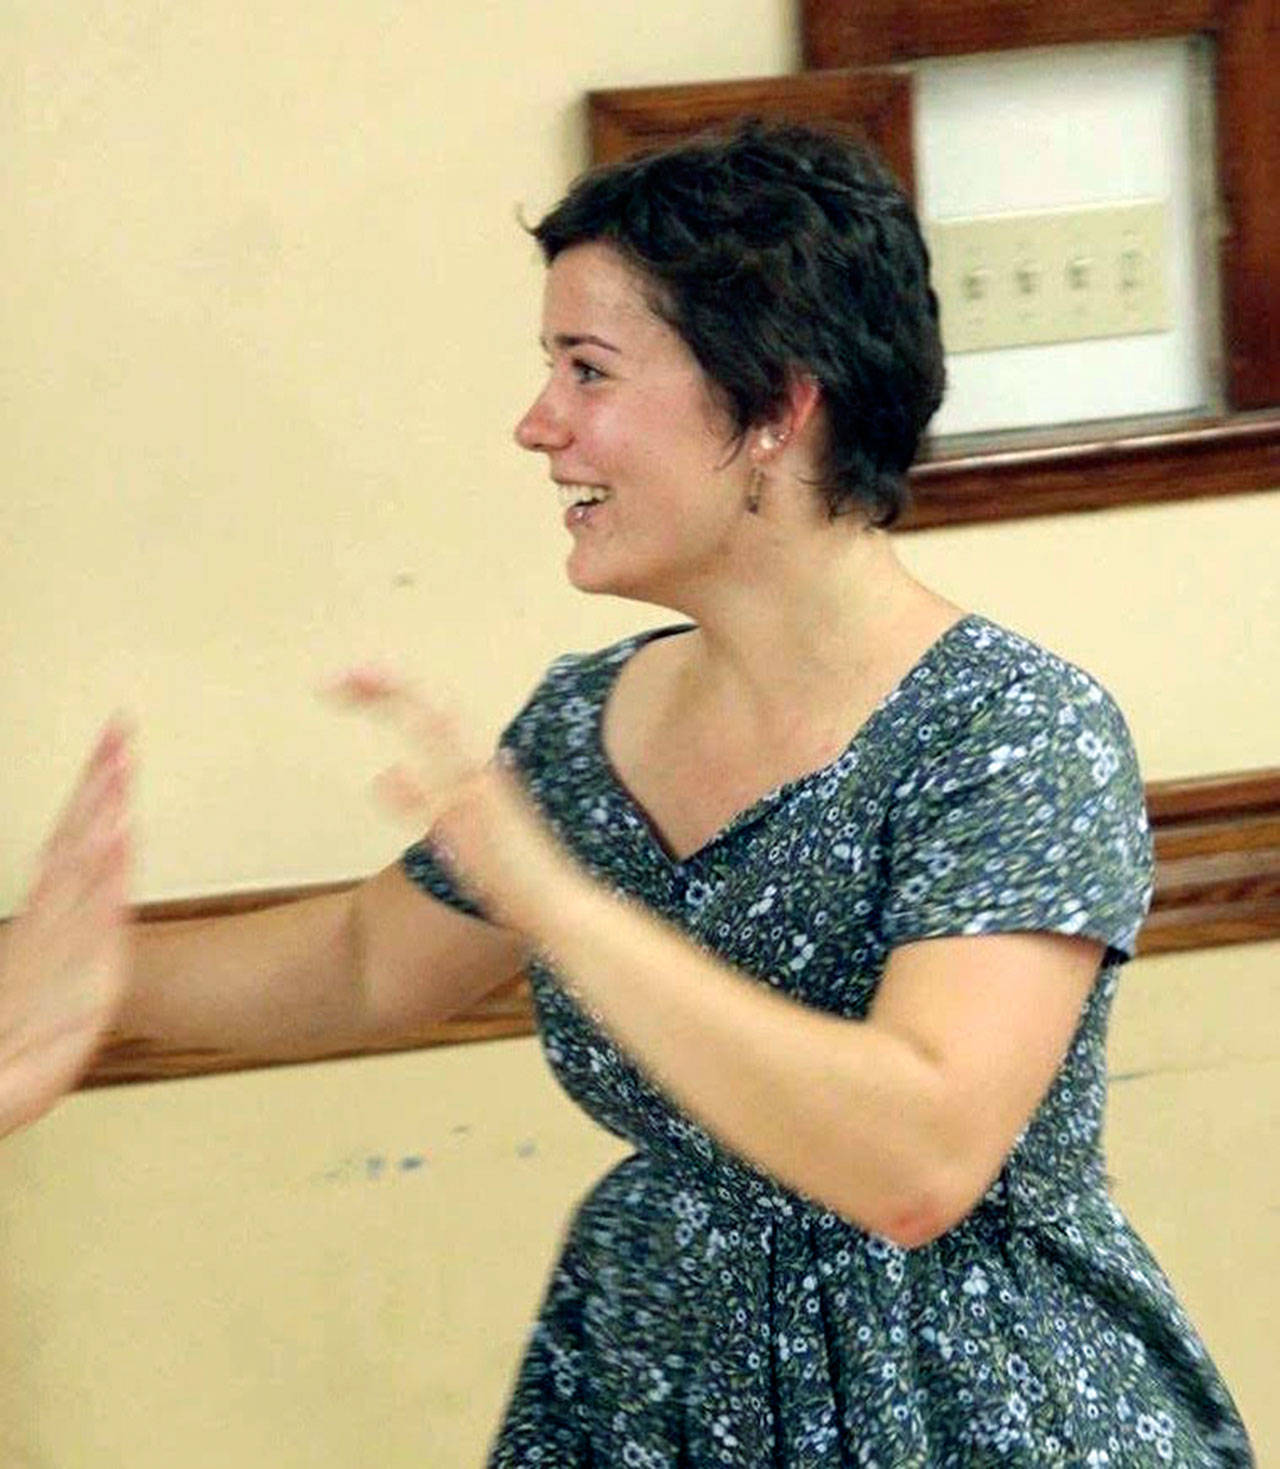 Dance caller Abigail Hobart will teach the steps at the first community contra dance of the season Saturday at Port Angeles’ Black Diamond Community Hall.